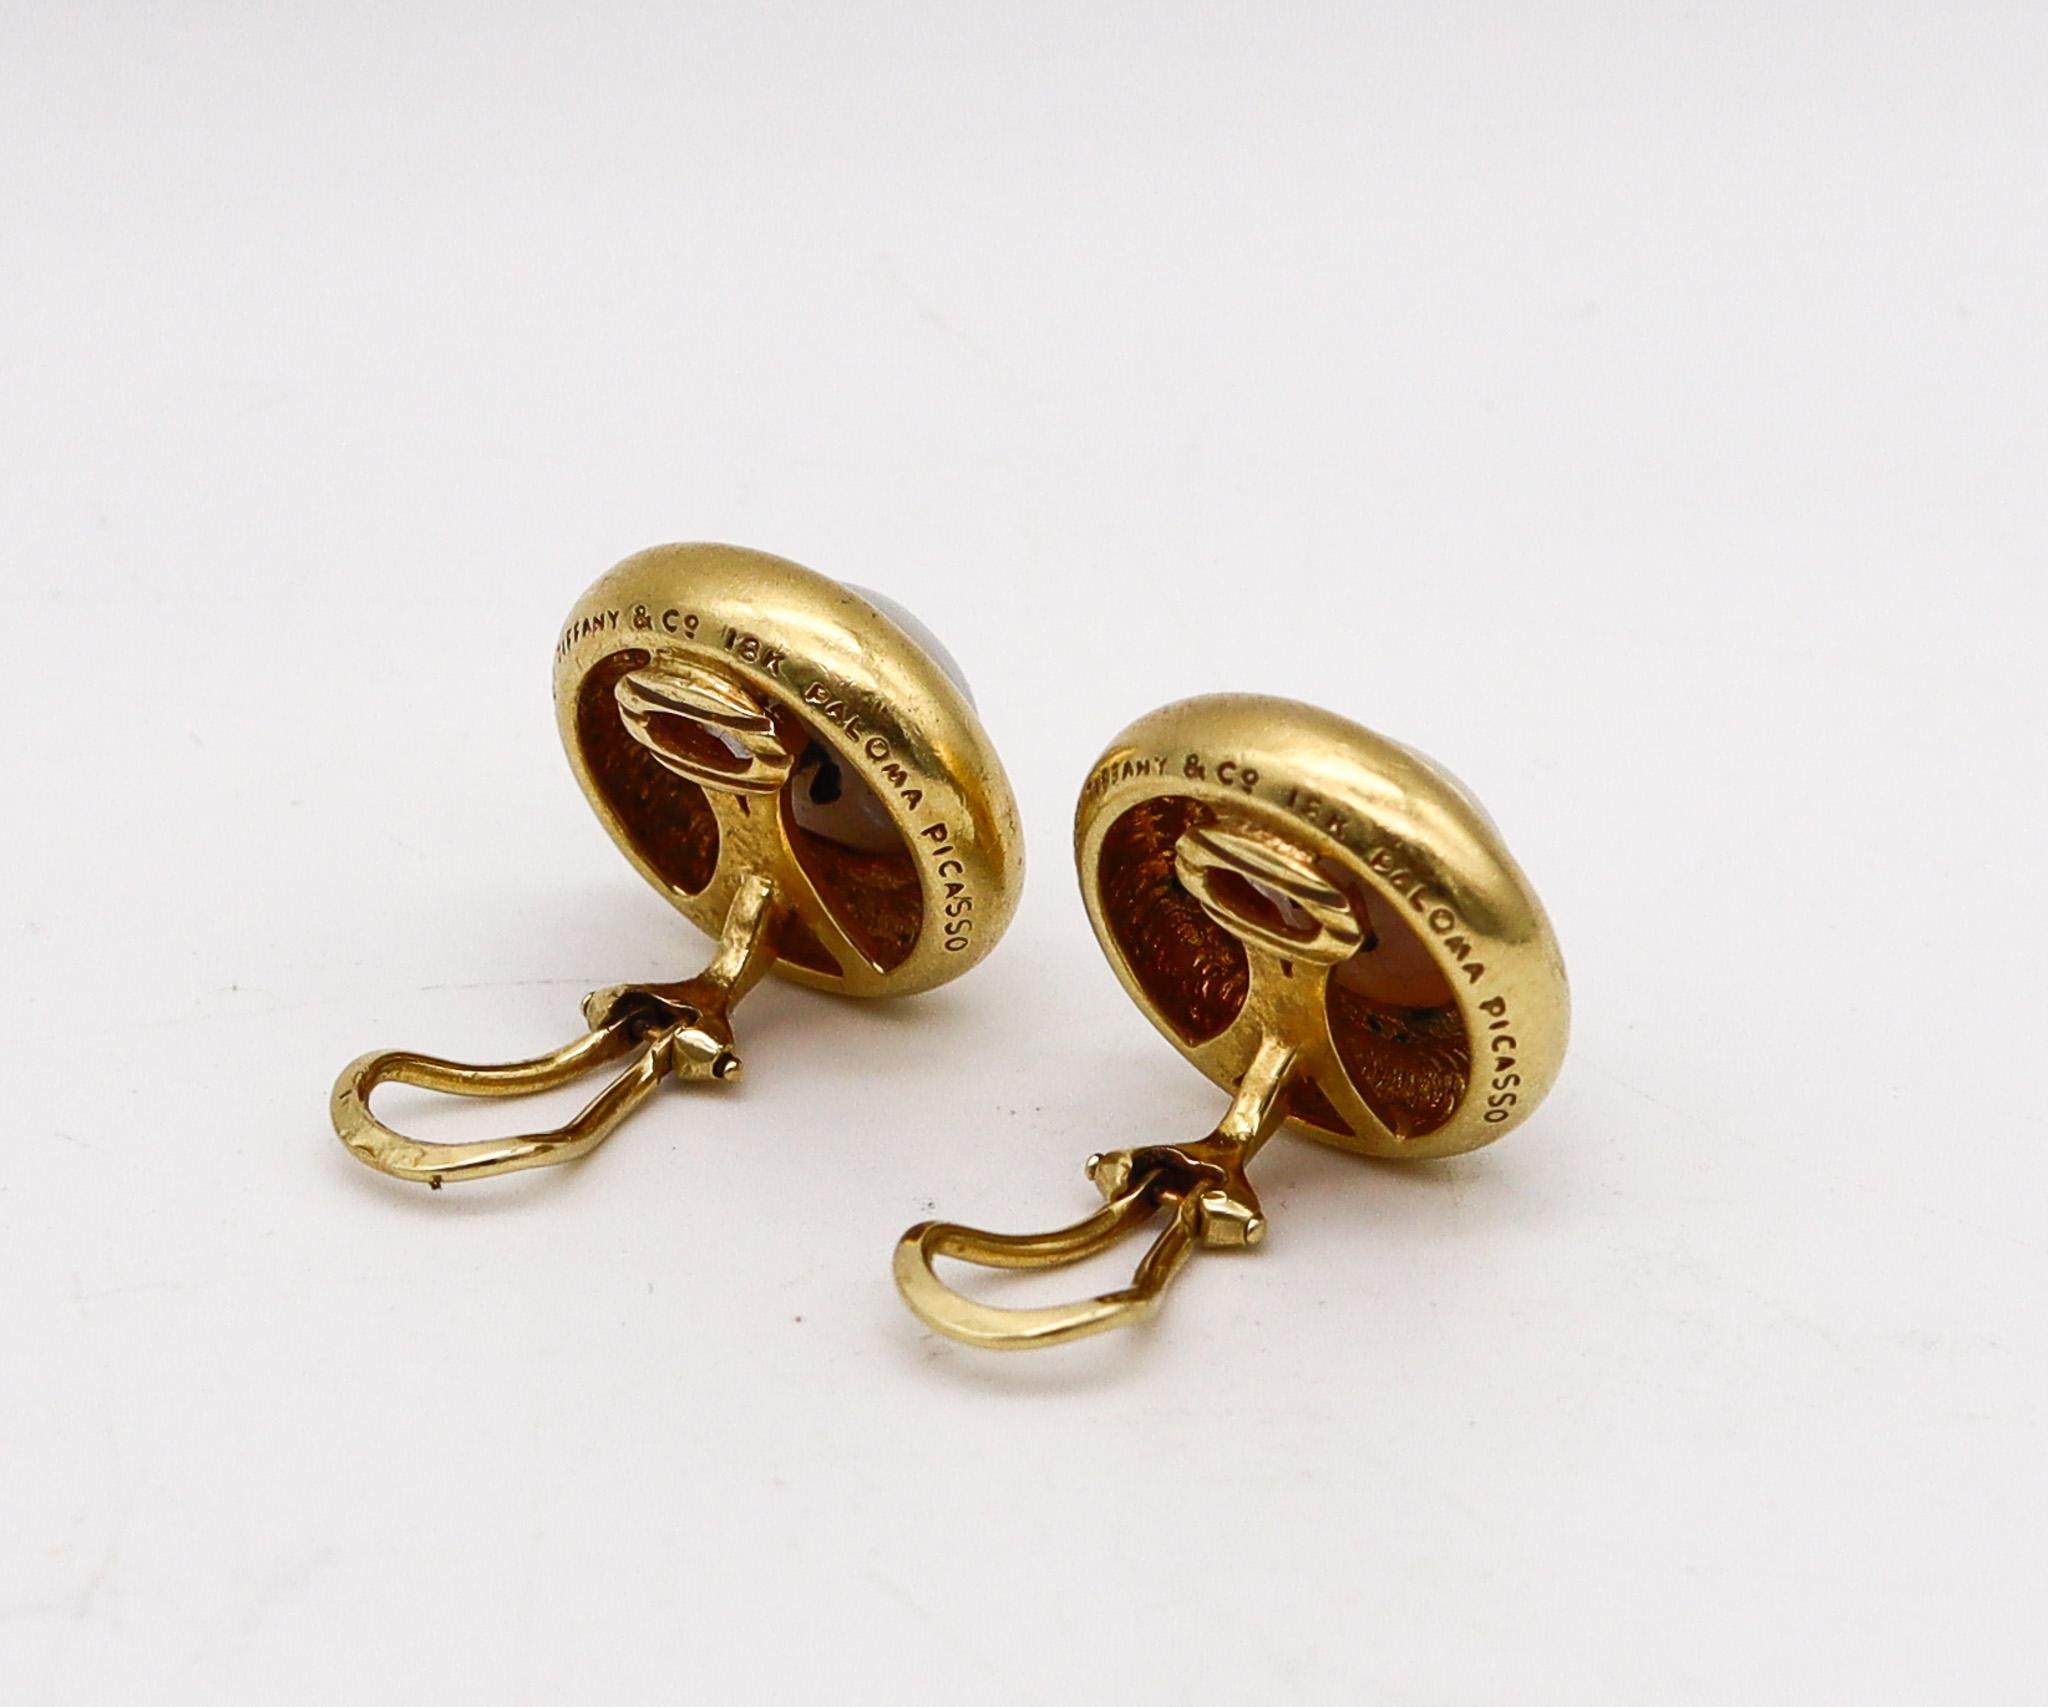 Brilliant Cut Tiffany & Co. 1981 Paloma Picasso Earrings In 18Kt Gold With Diamonds And Pearls For Sale